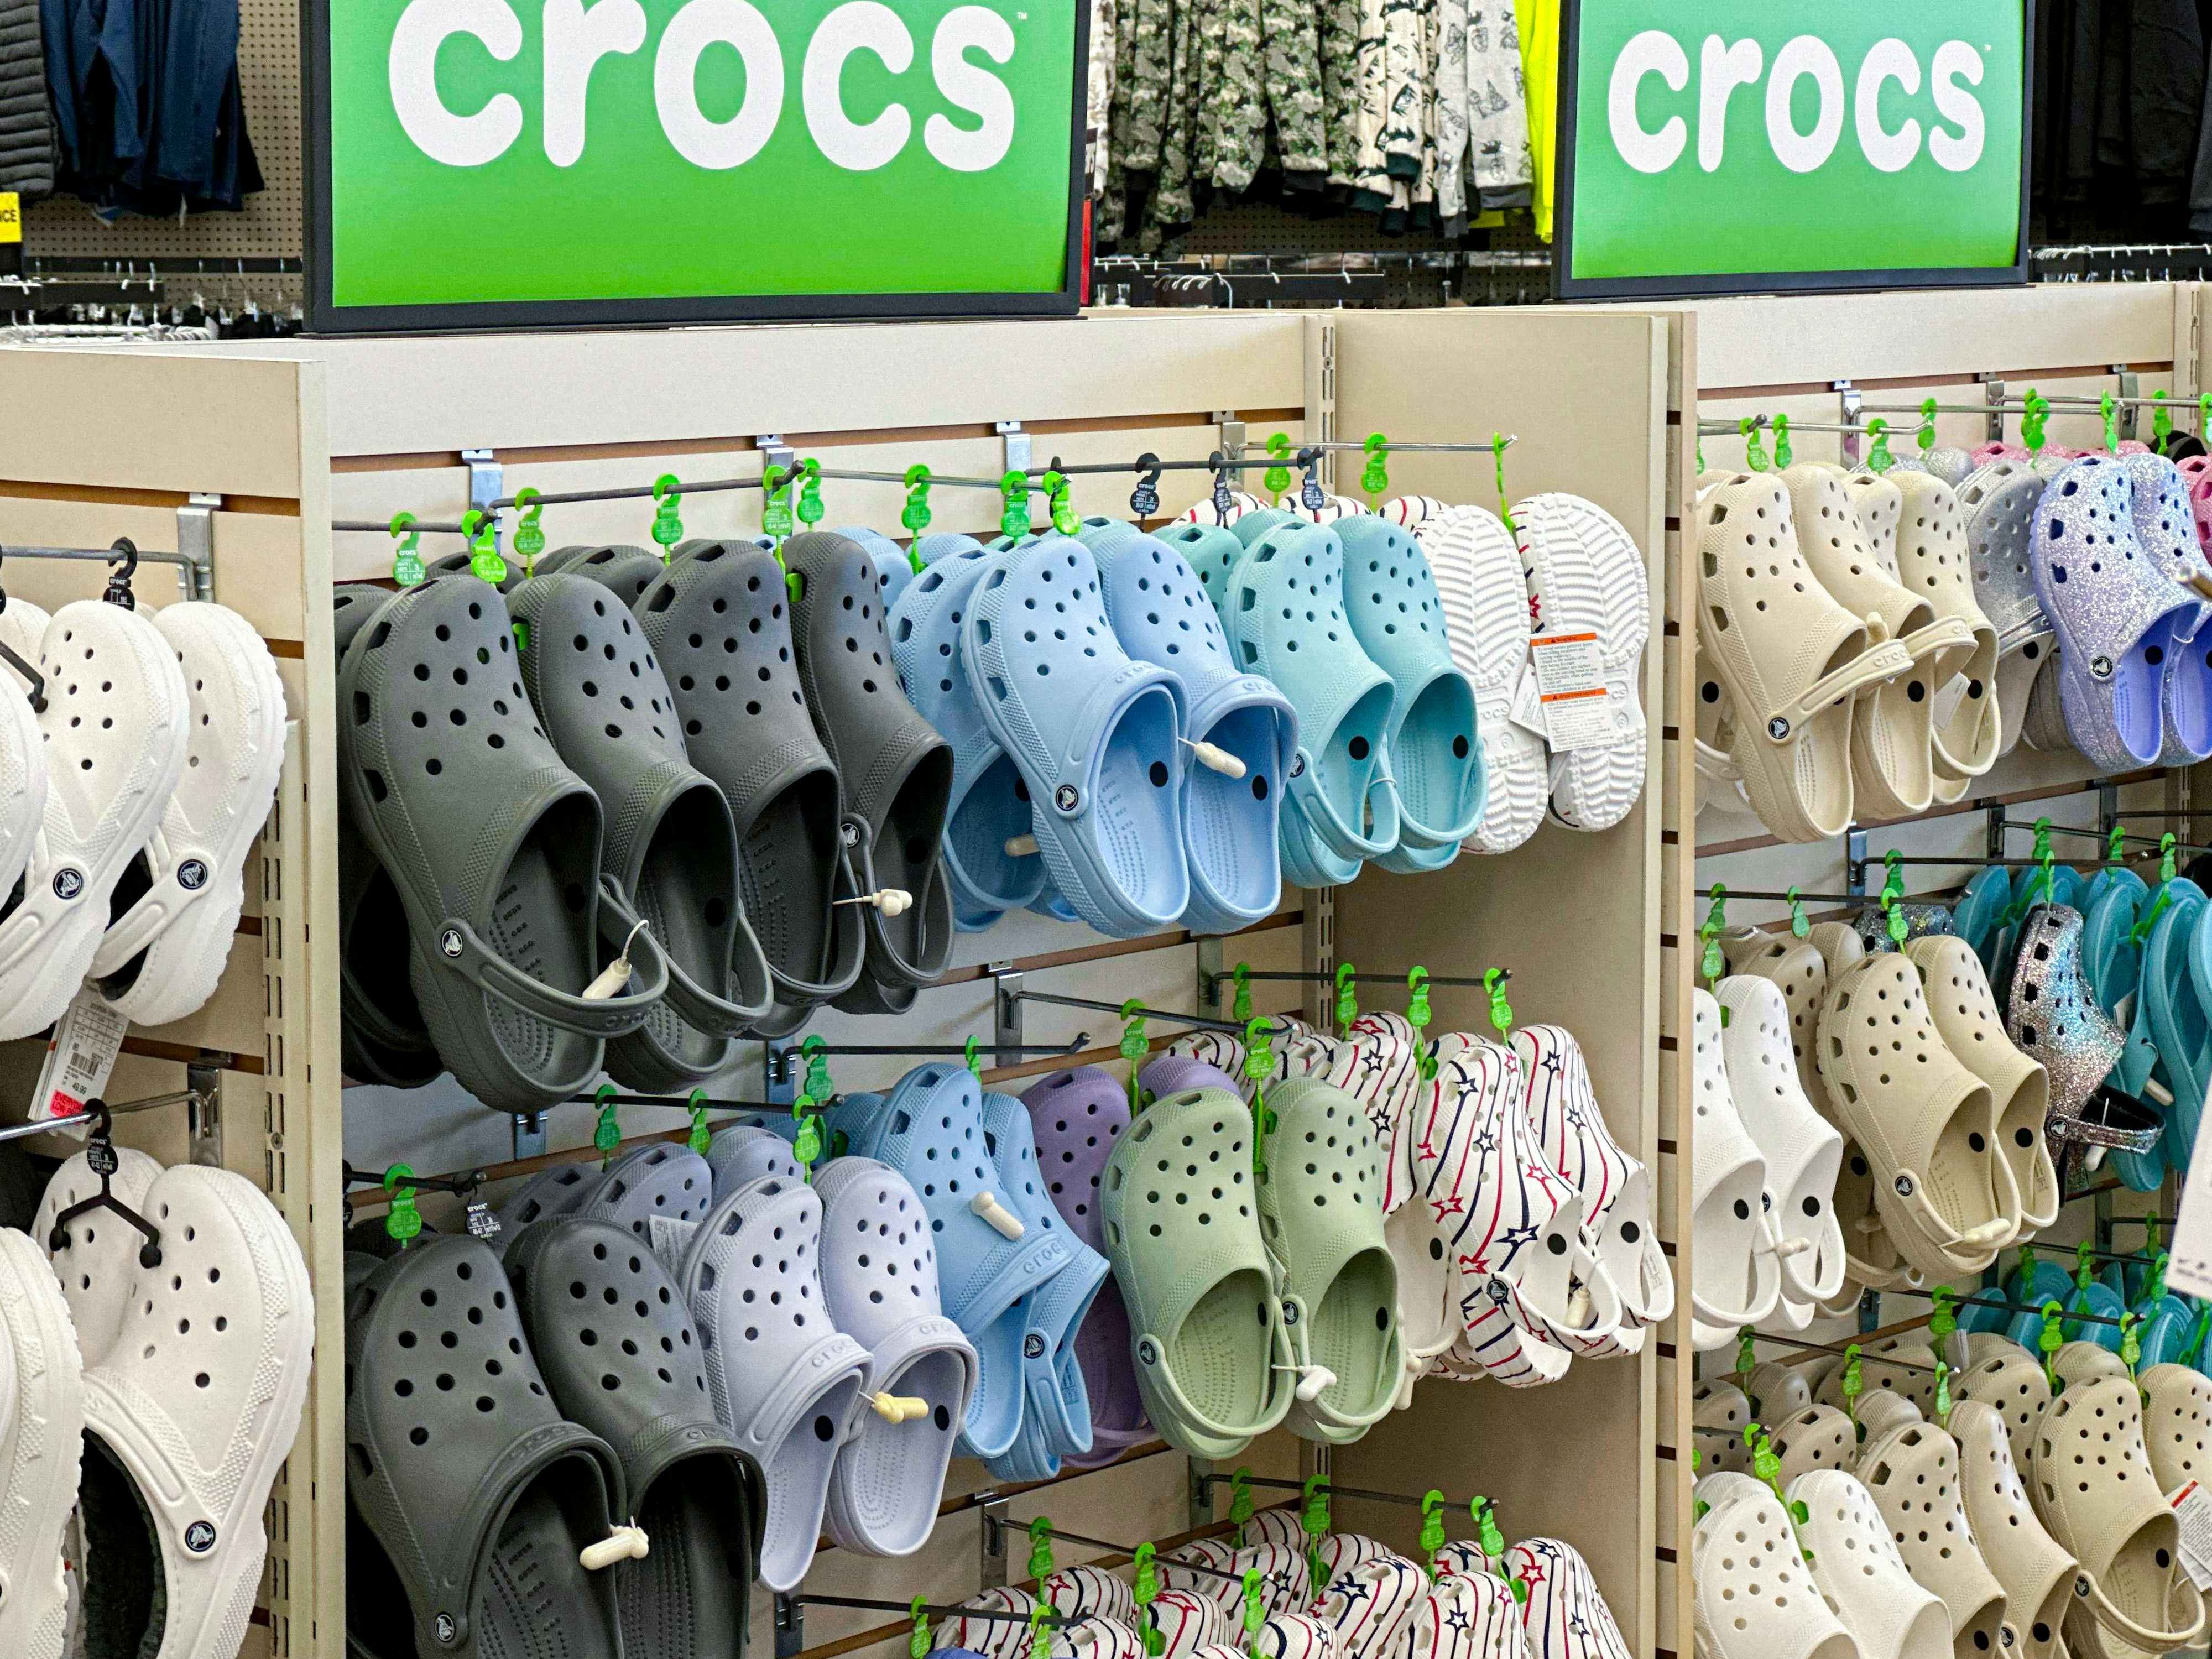 Crocs for the Fam: Starting at $20 Shipped on eBay